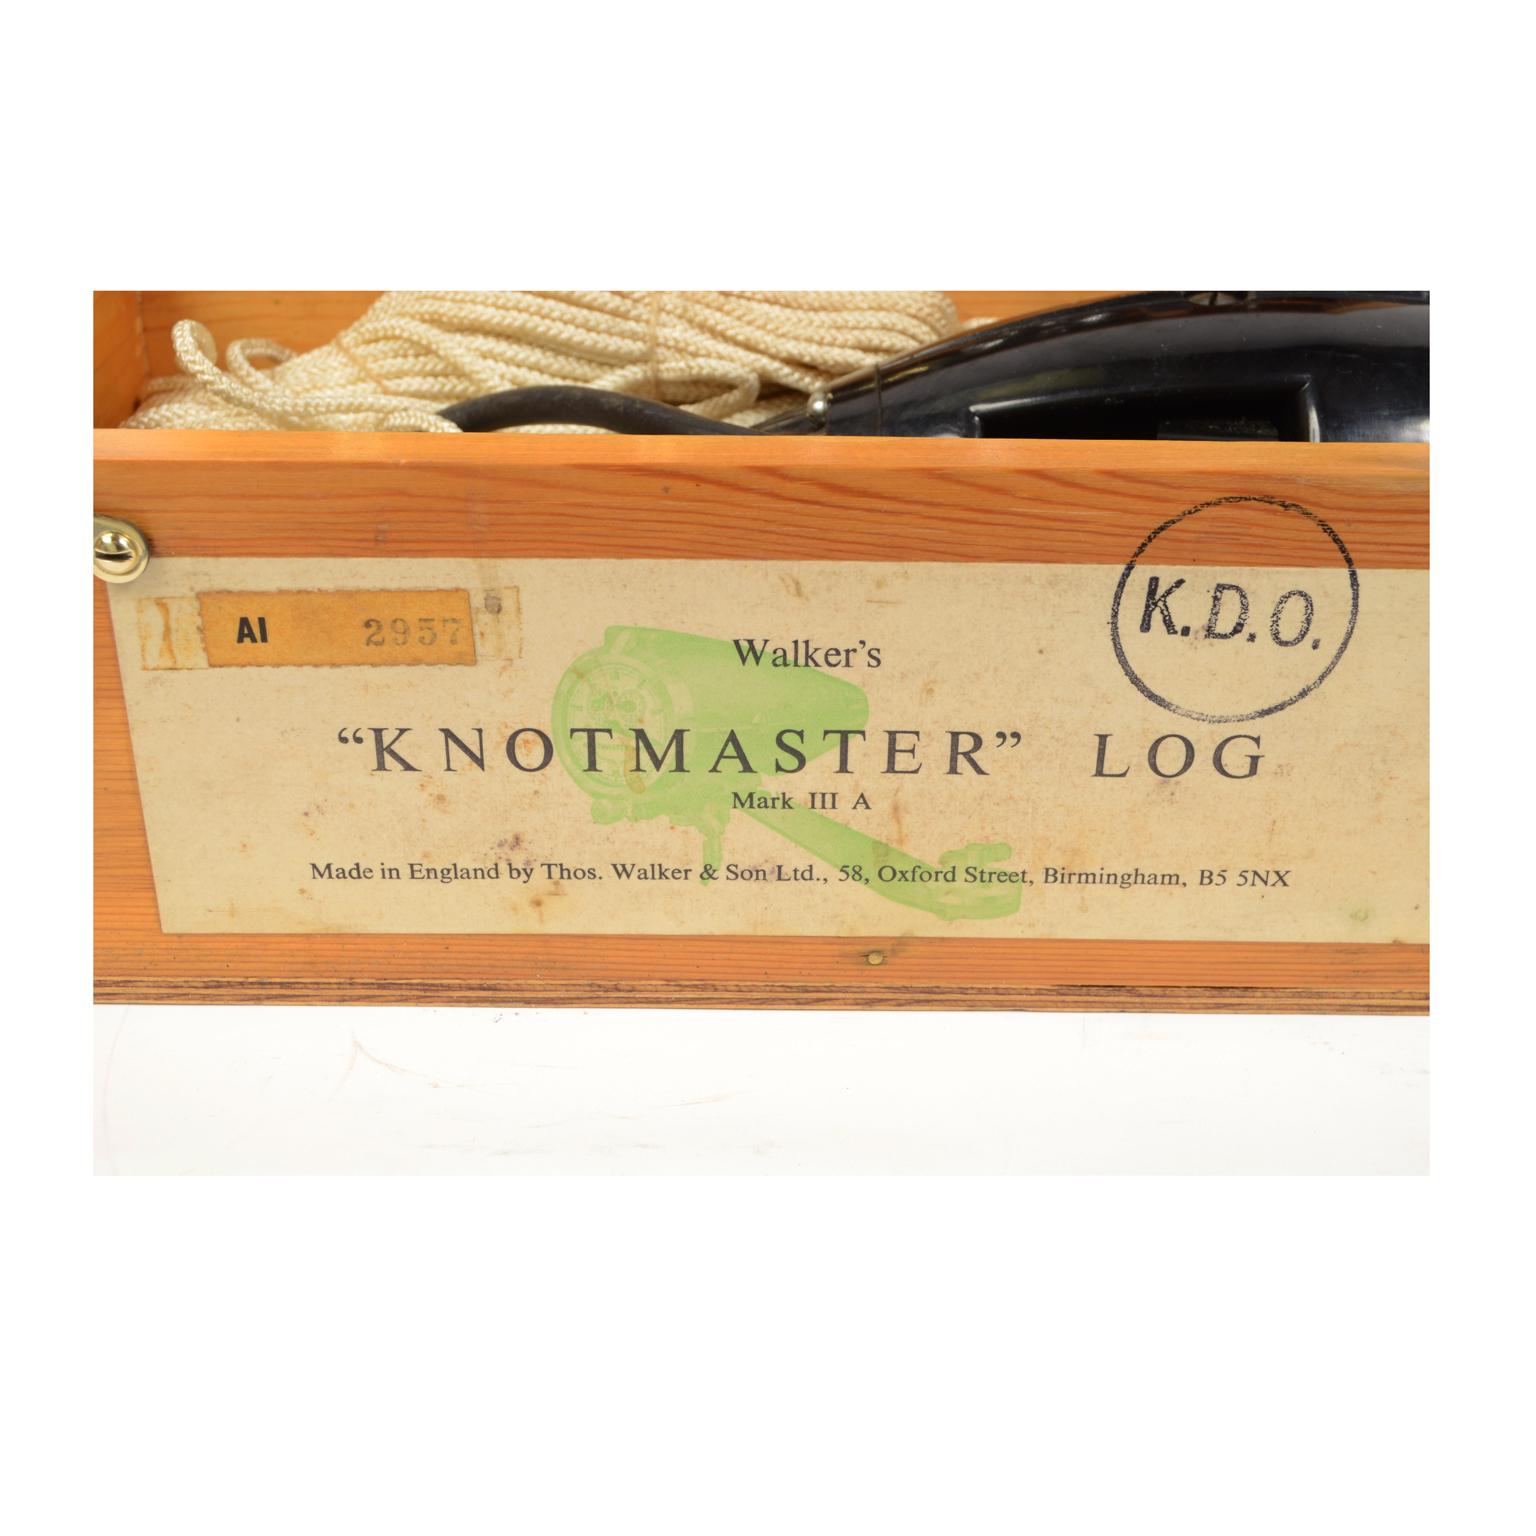 British Nautical Log in Its Wooden Box to Measure Boats Speed Walker London, 1930s